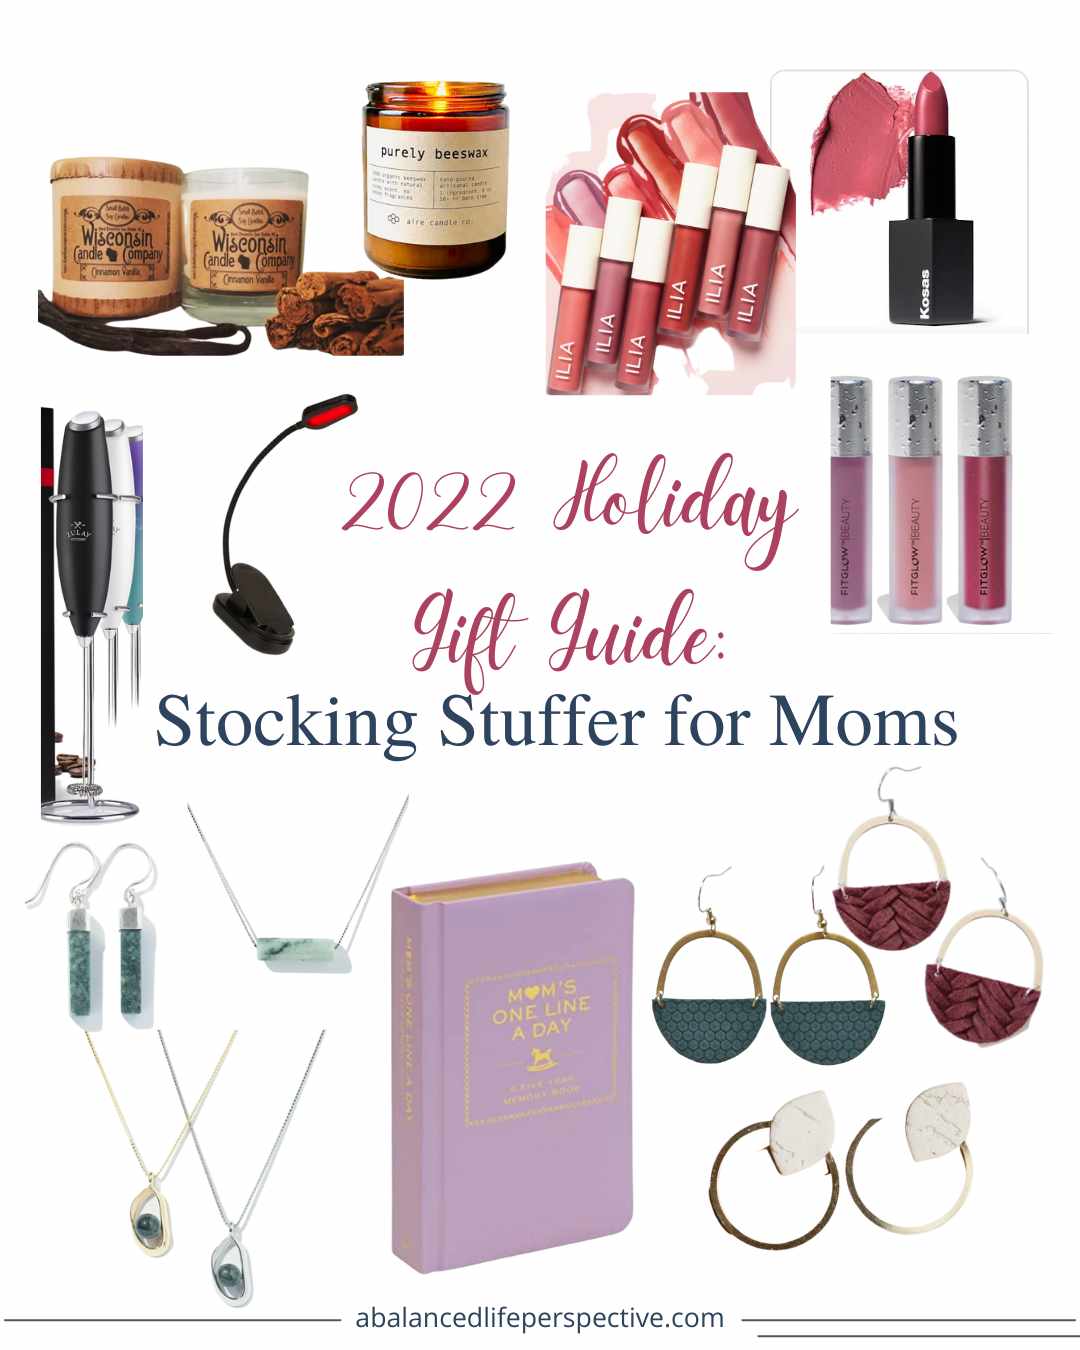 Holiday Shopping 2022: 10 Essential Stocking Stuffers for Moms